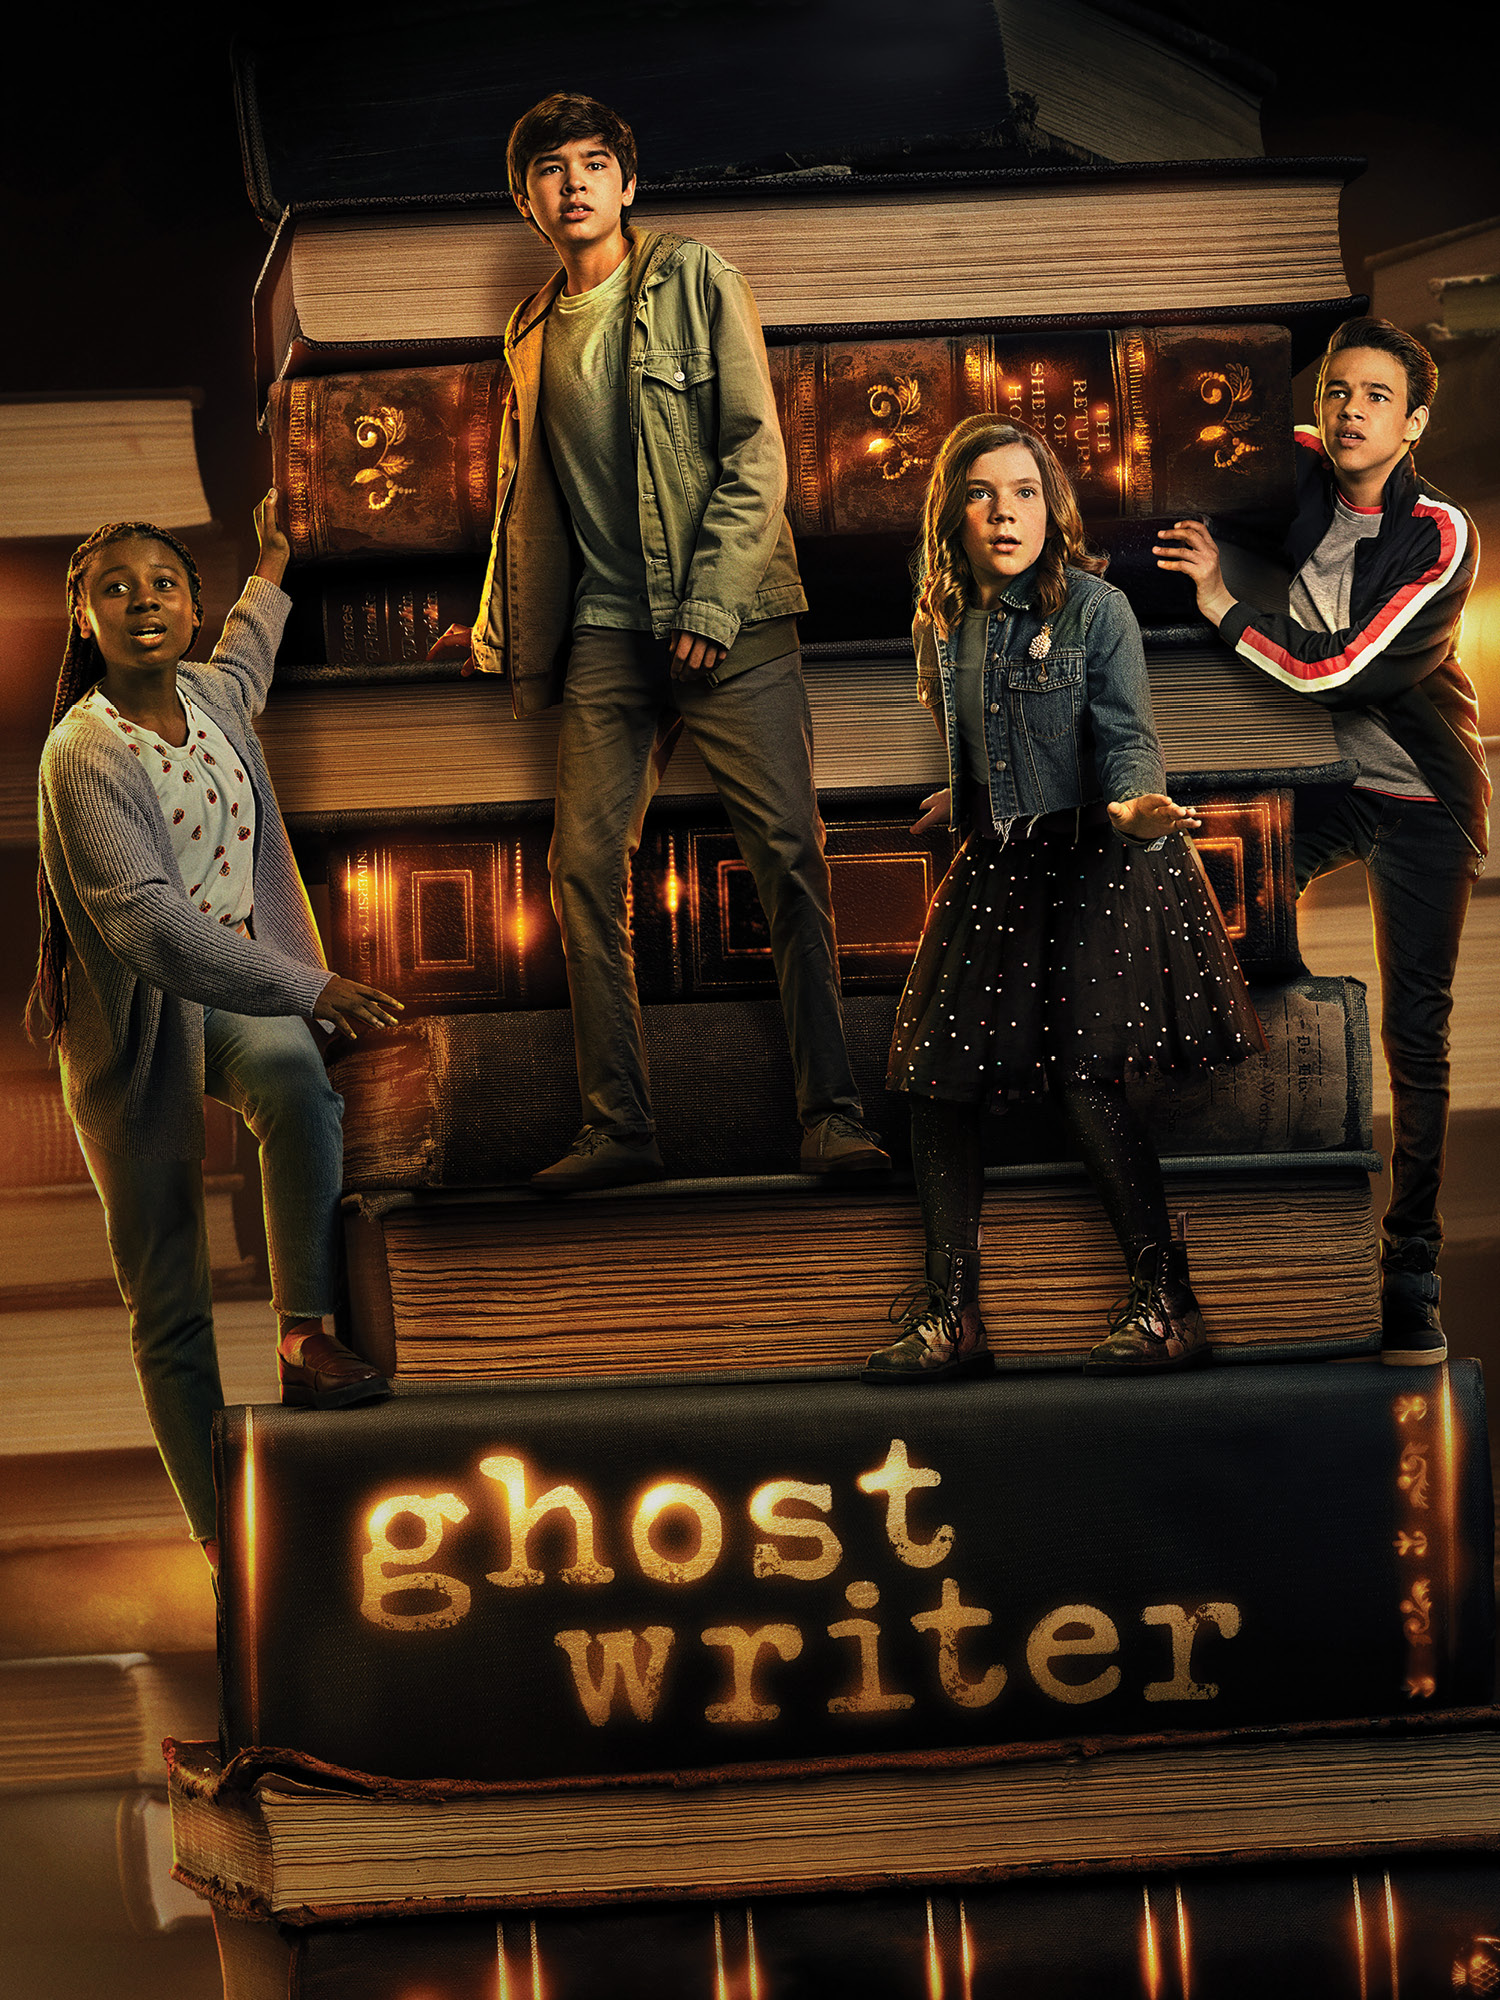 Promotional image of the cast from the show 